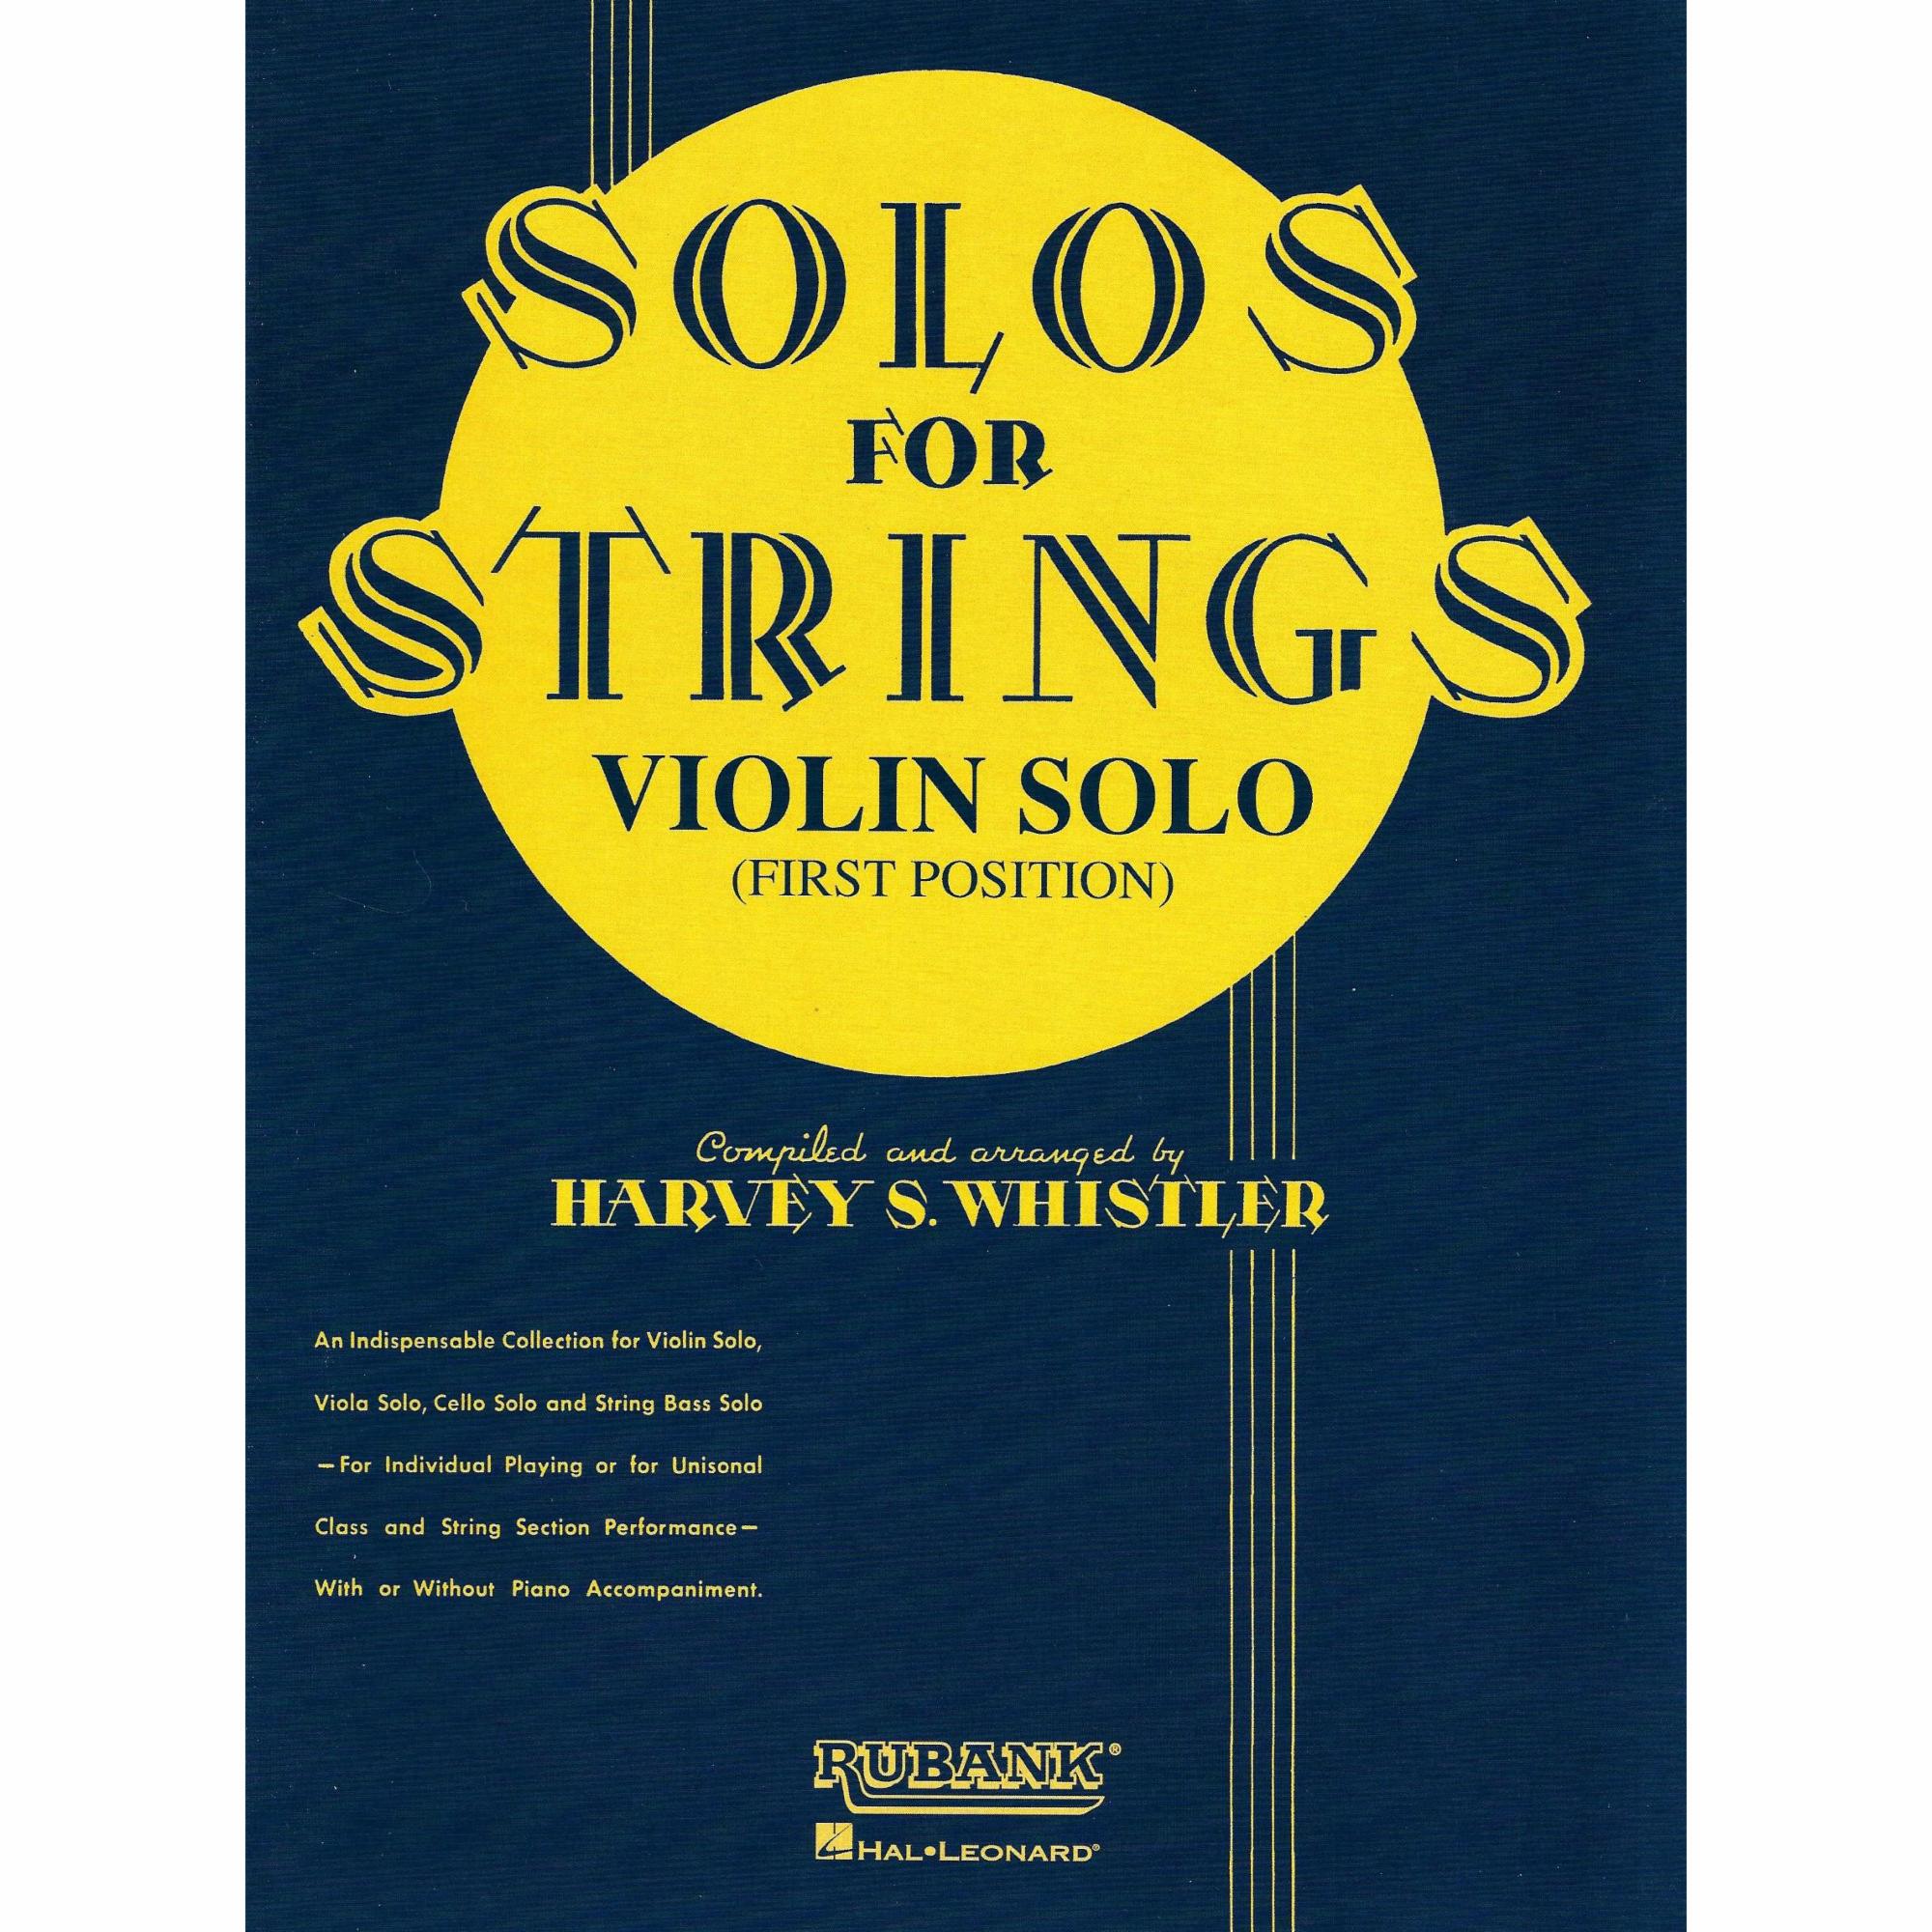 Solos for Strings